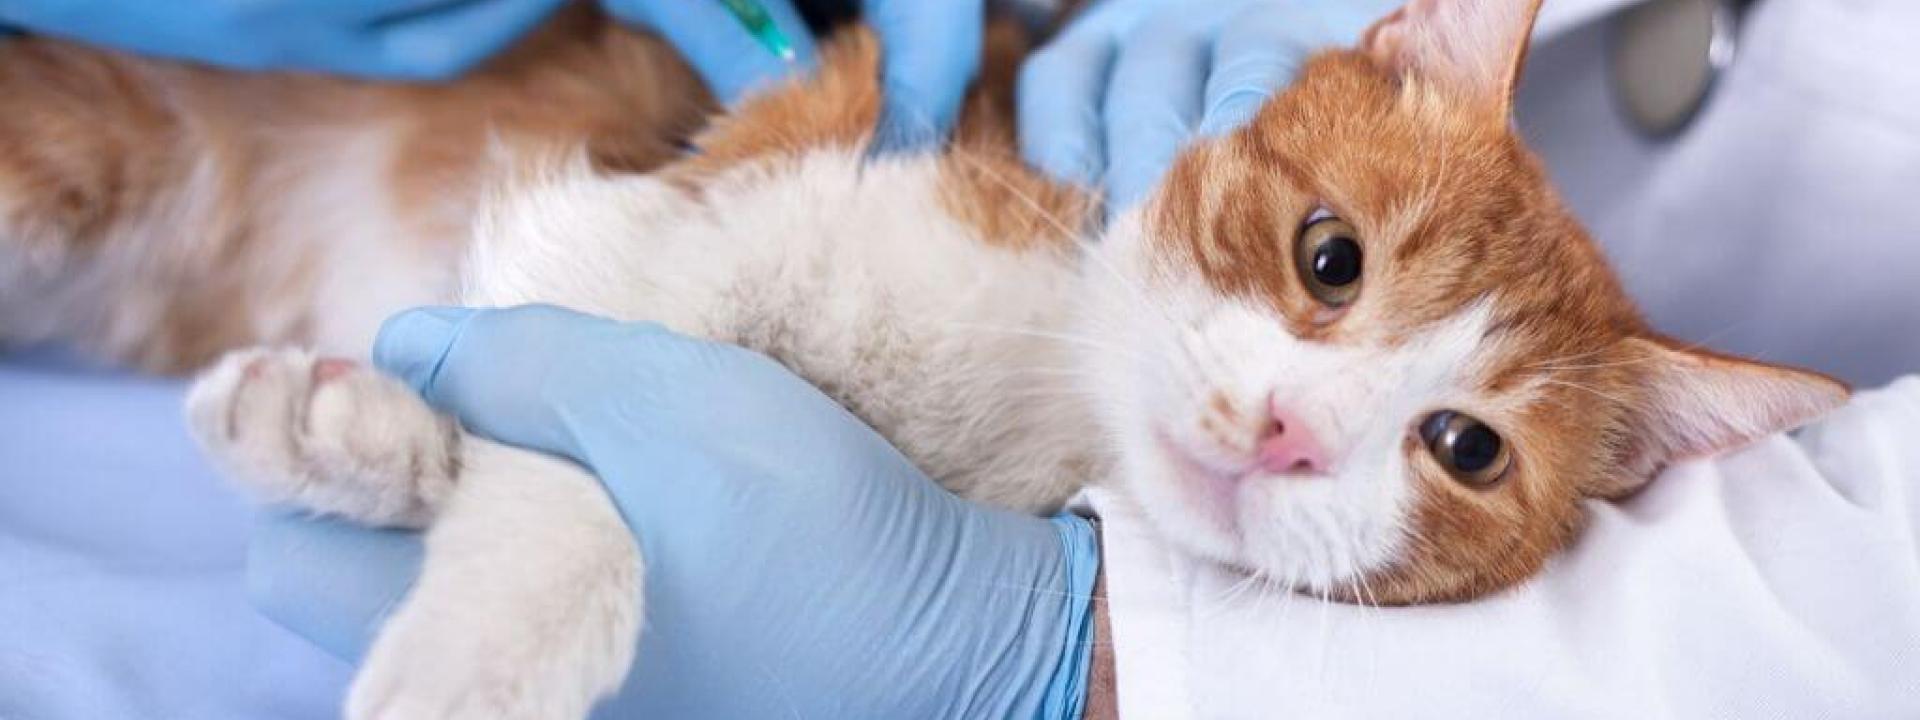 low cost pet vaccinations can be dangerous